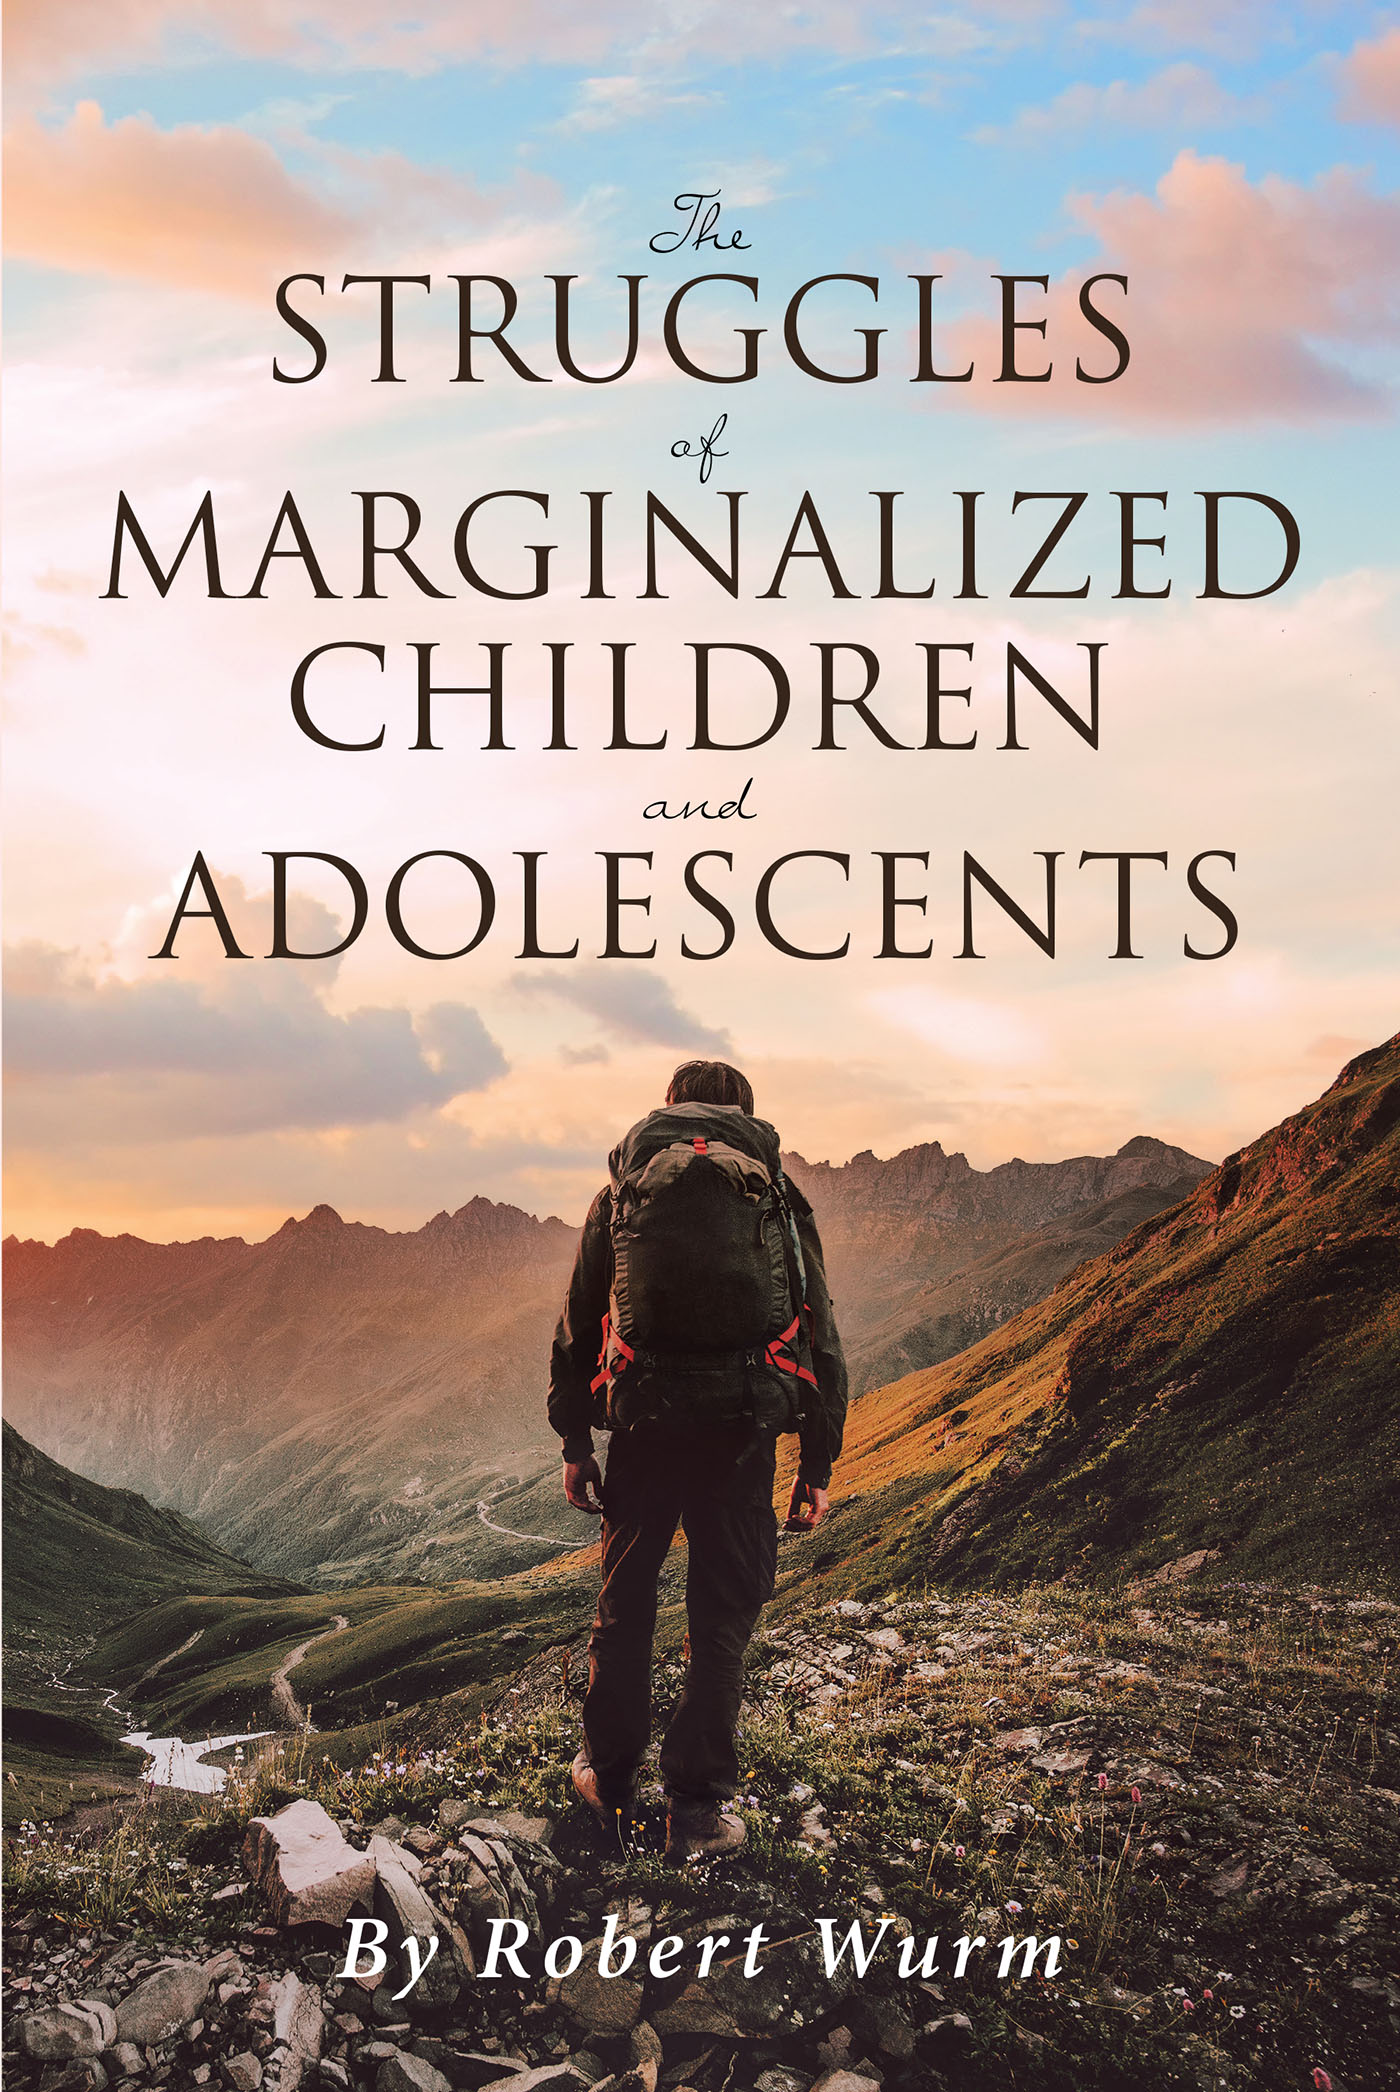 Author Robert Wurm’s New Book, "The Struggles of Marginalized Children and Adolescents," Discusses How Traumatic Experiences Can Cause Children to Become Disparaged